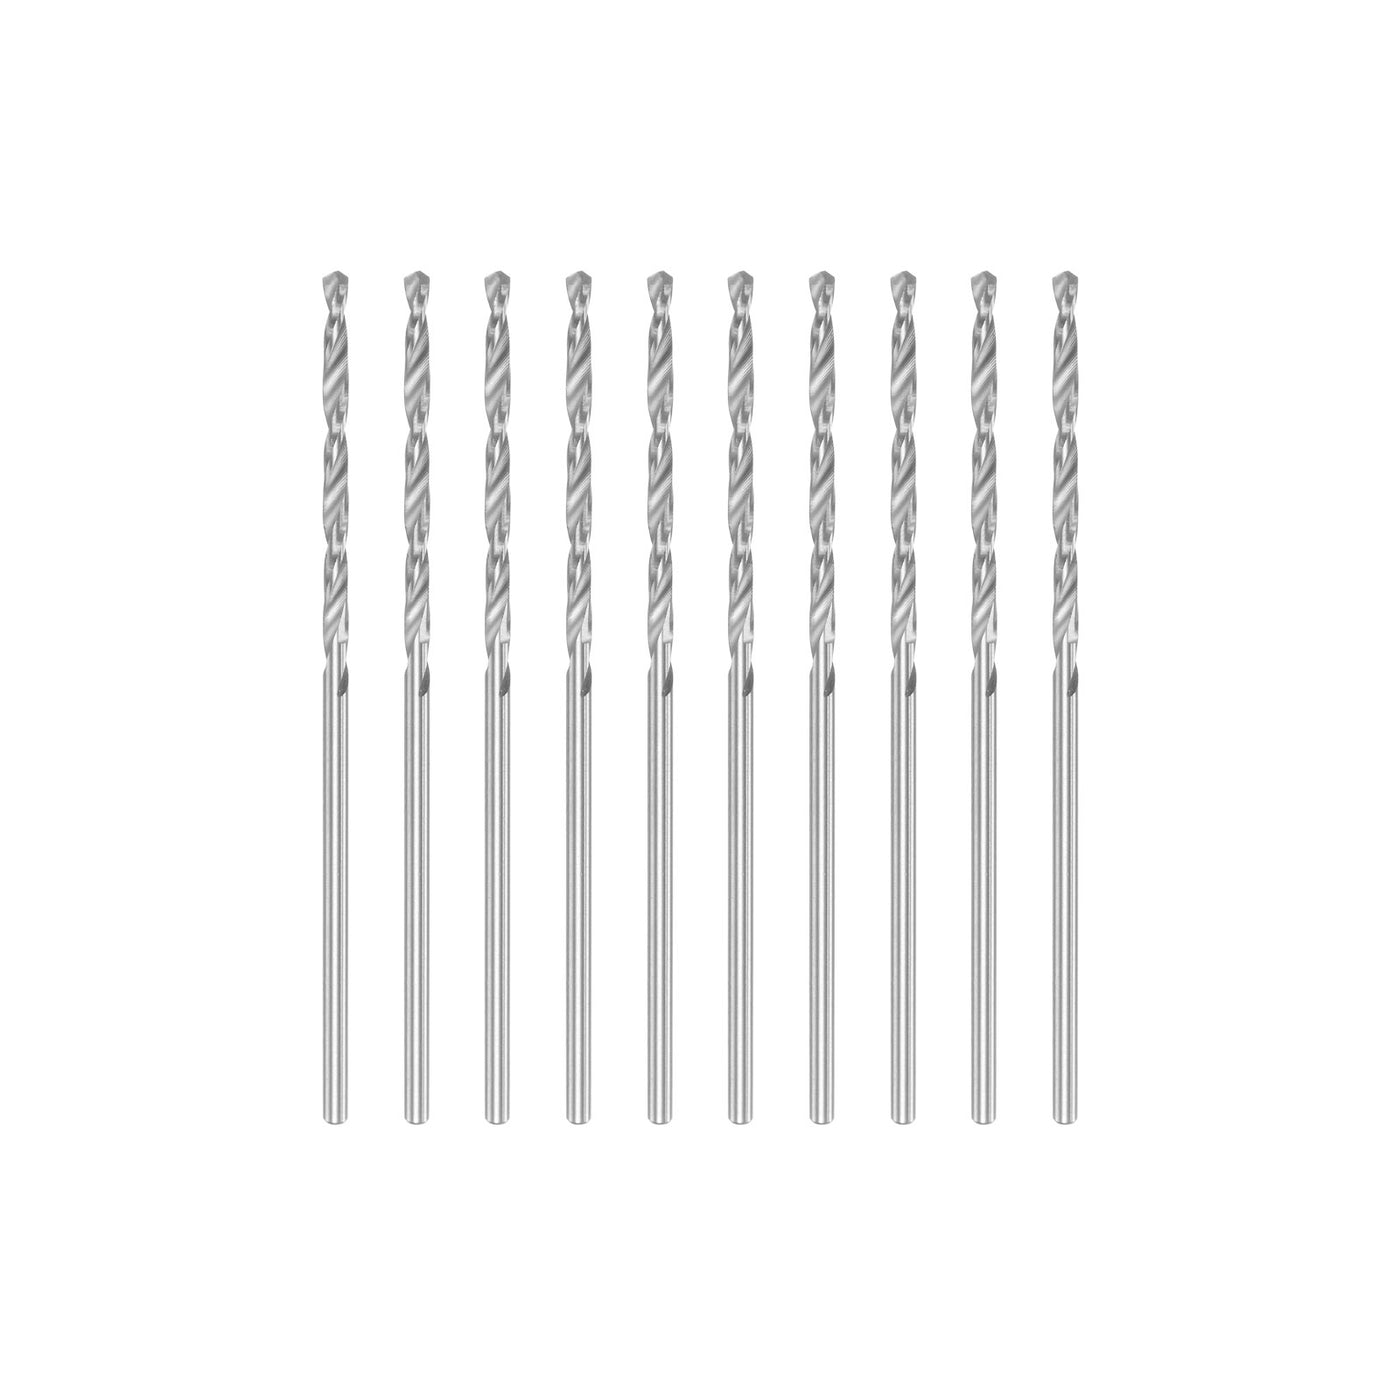 uxcell Uxcell 10 Pcs 1.45mm High Speed Steel Drill Bits, Fully Ground 48mm Length Drill Bit